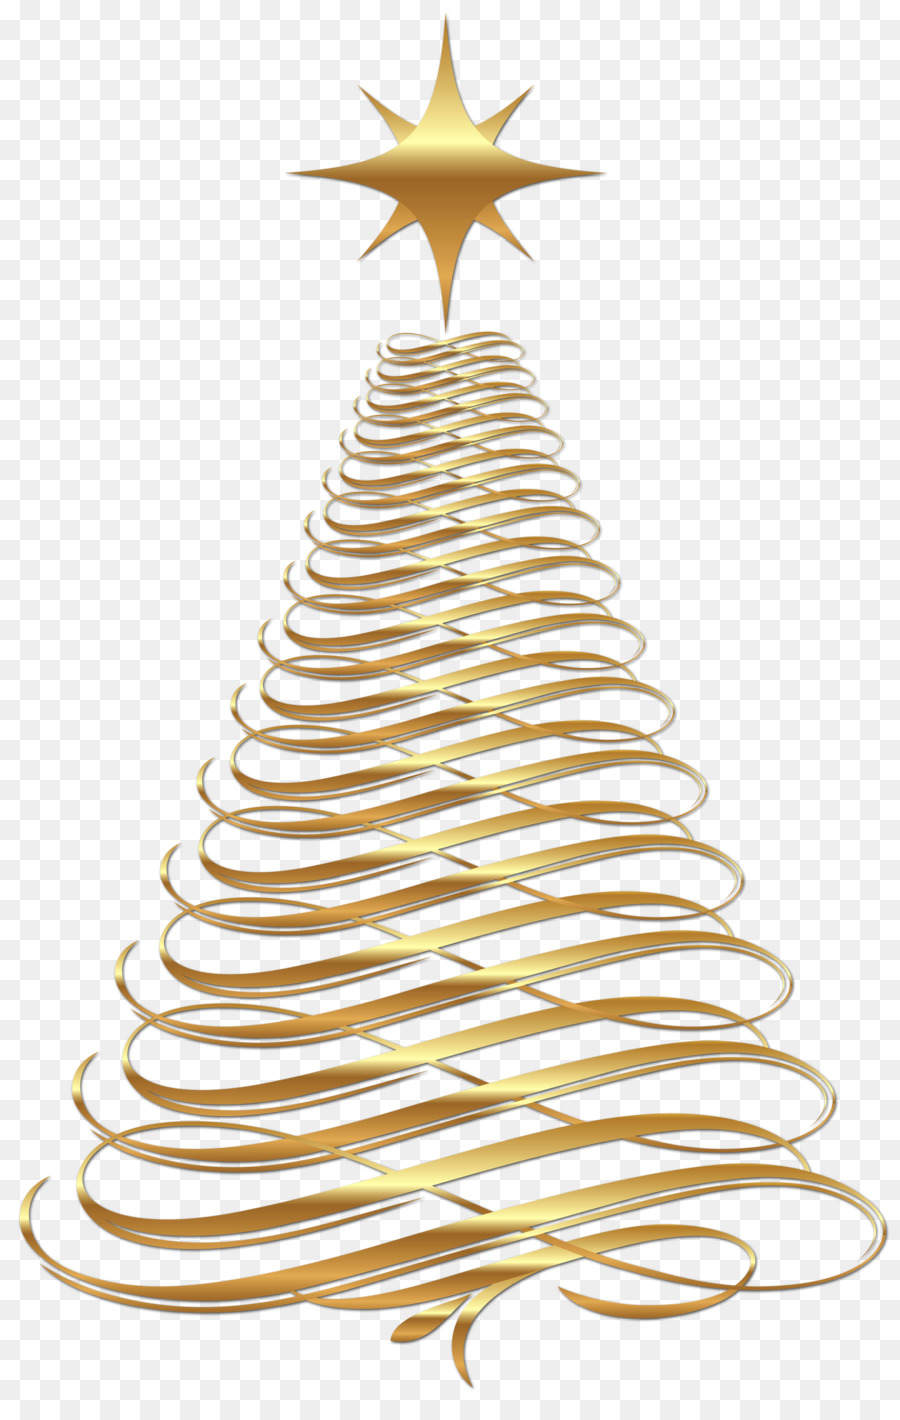 Christmas tree Christmas ornament Clip art - steve borden png download - 2880*4516 - Free Transparent Christmas Tree png Download.